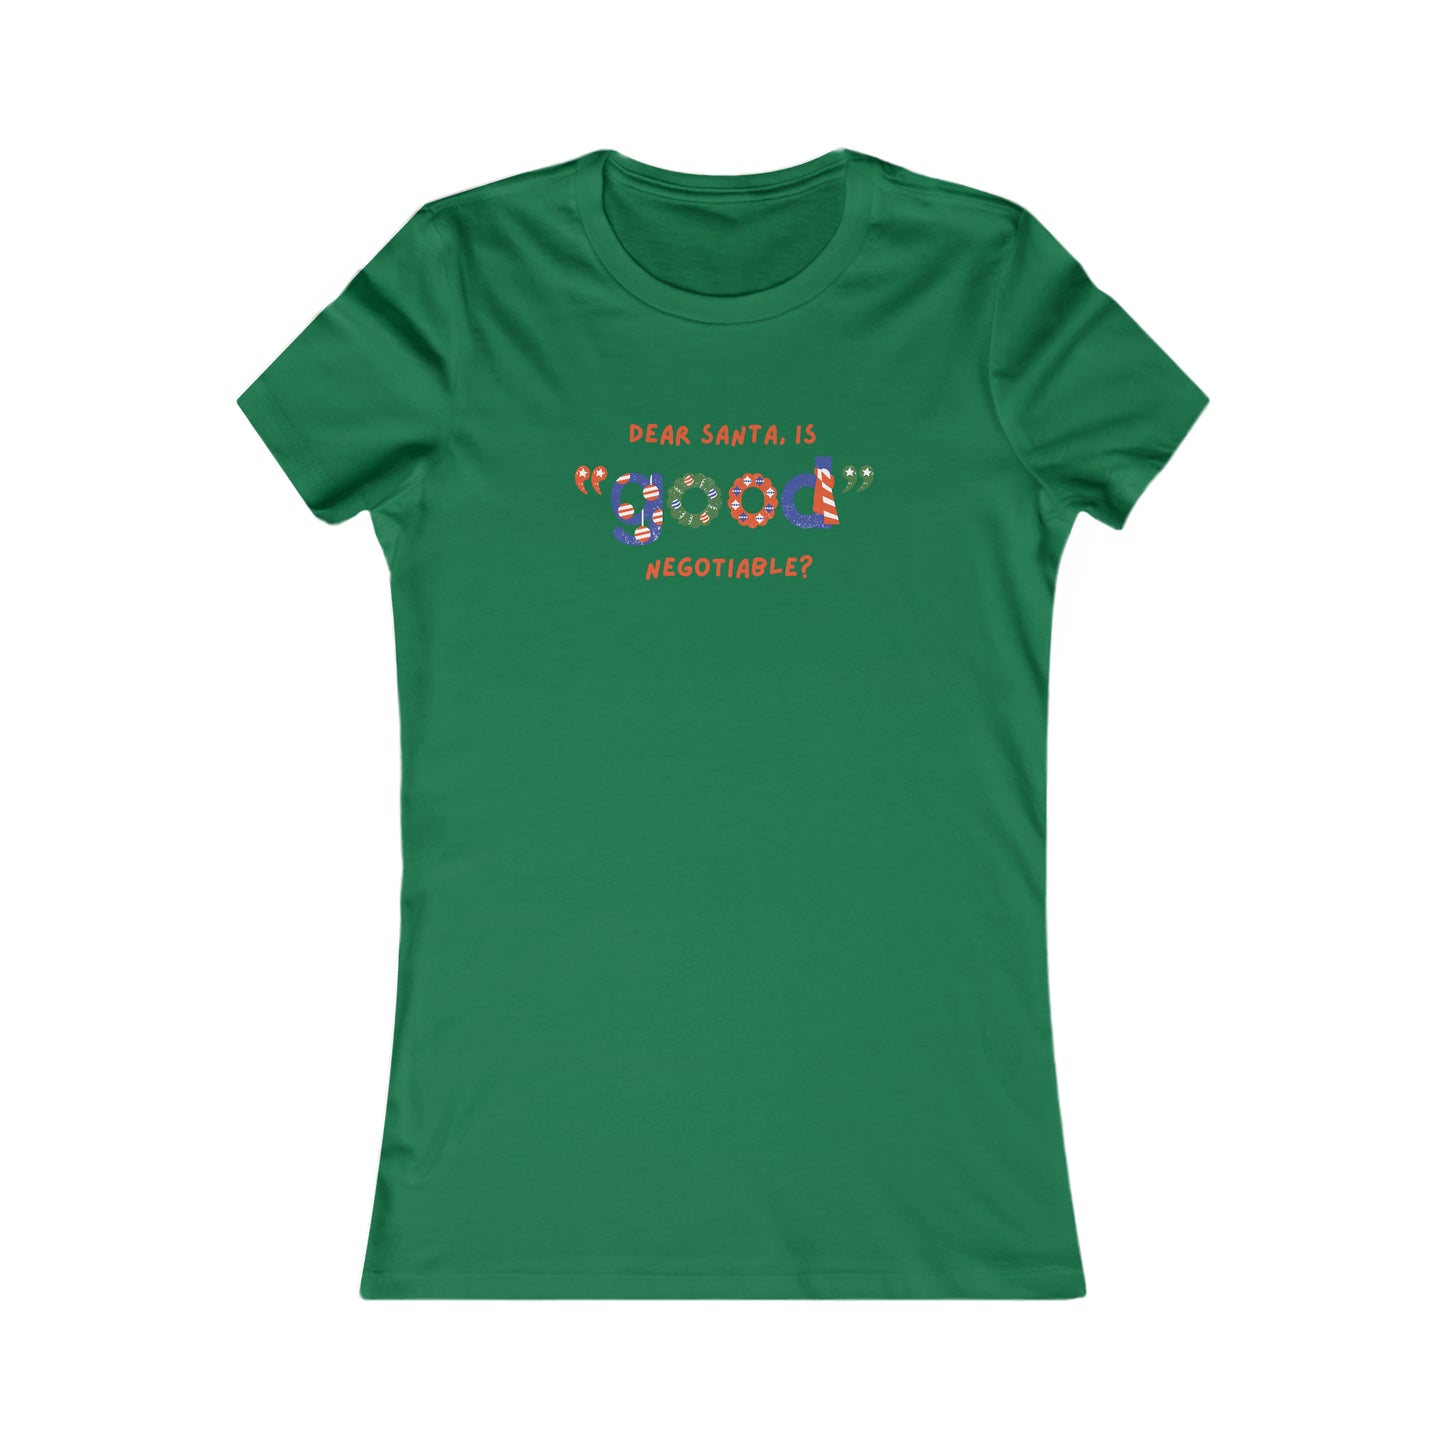 Is Good Negotiable T-shirt